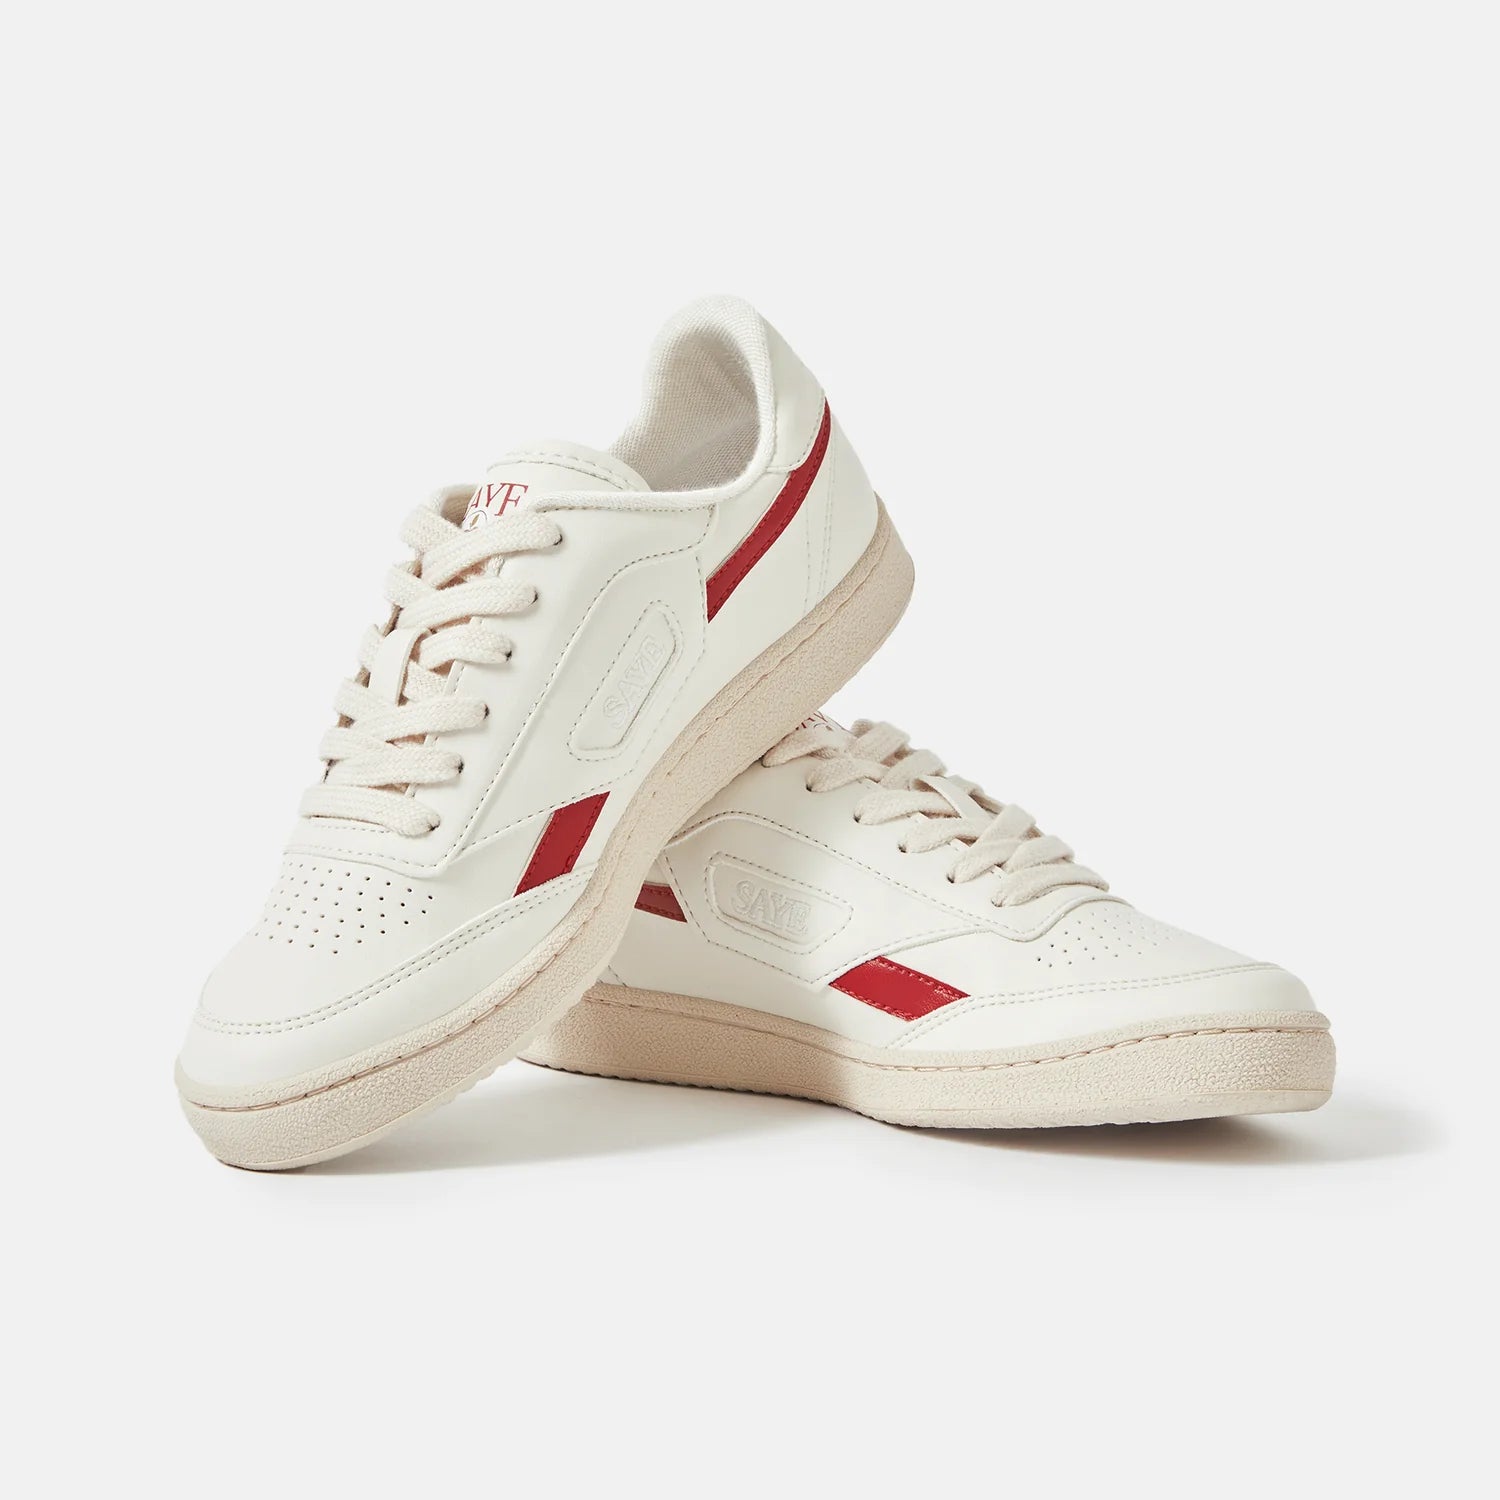 A pair of Modelo '89 sneakers in vegan Napa material, Apple red edition by SAYE, on a white surface.